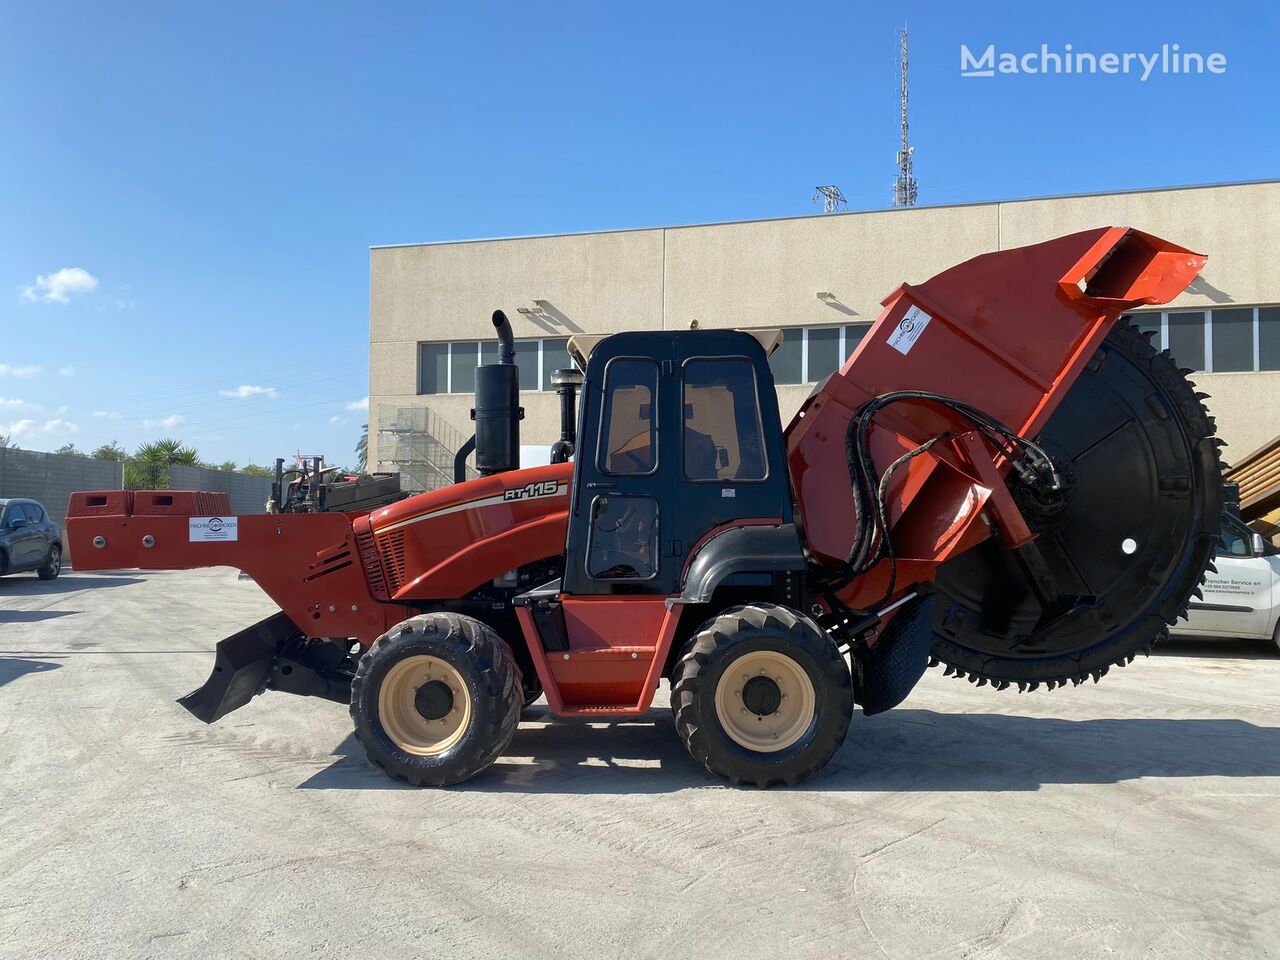 Ditch-Witch RT115 trencher